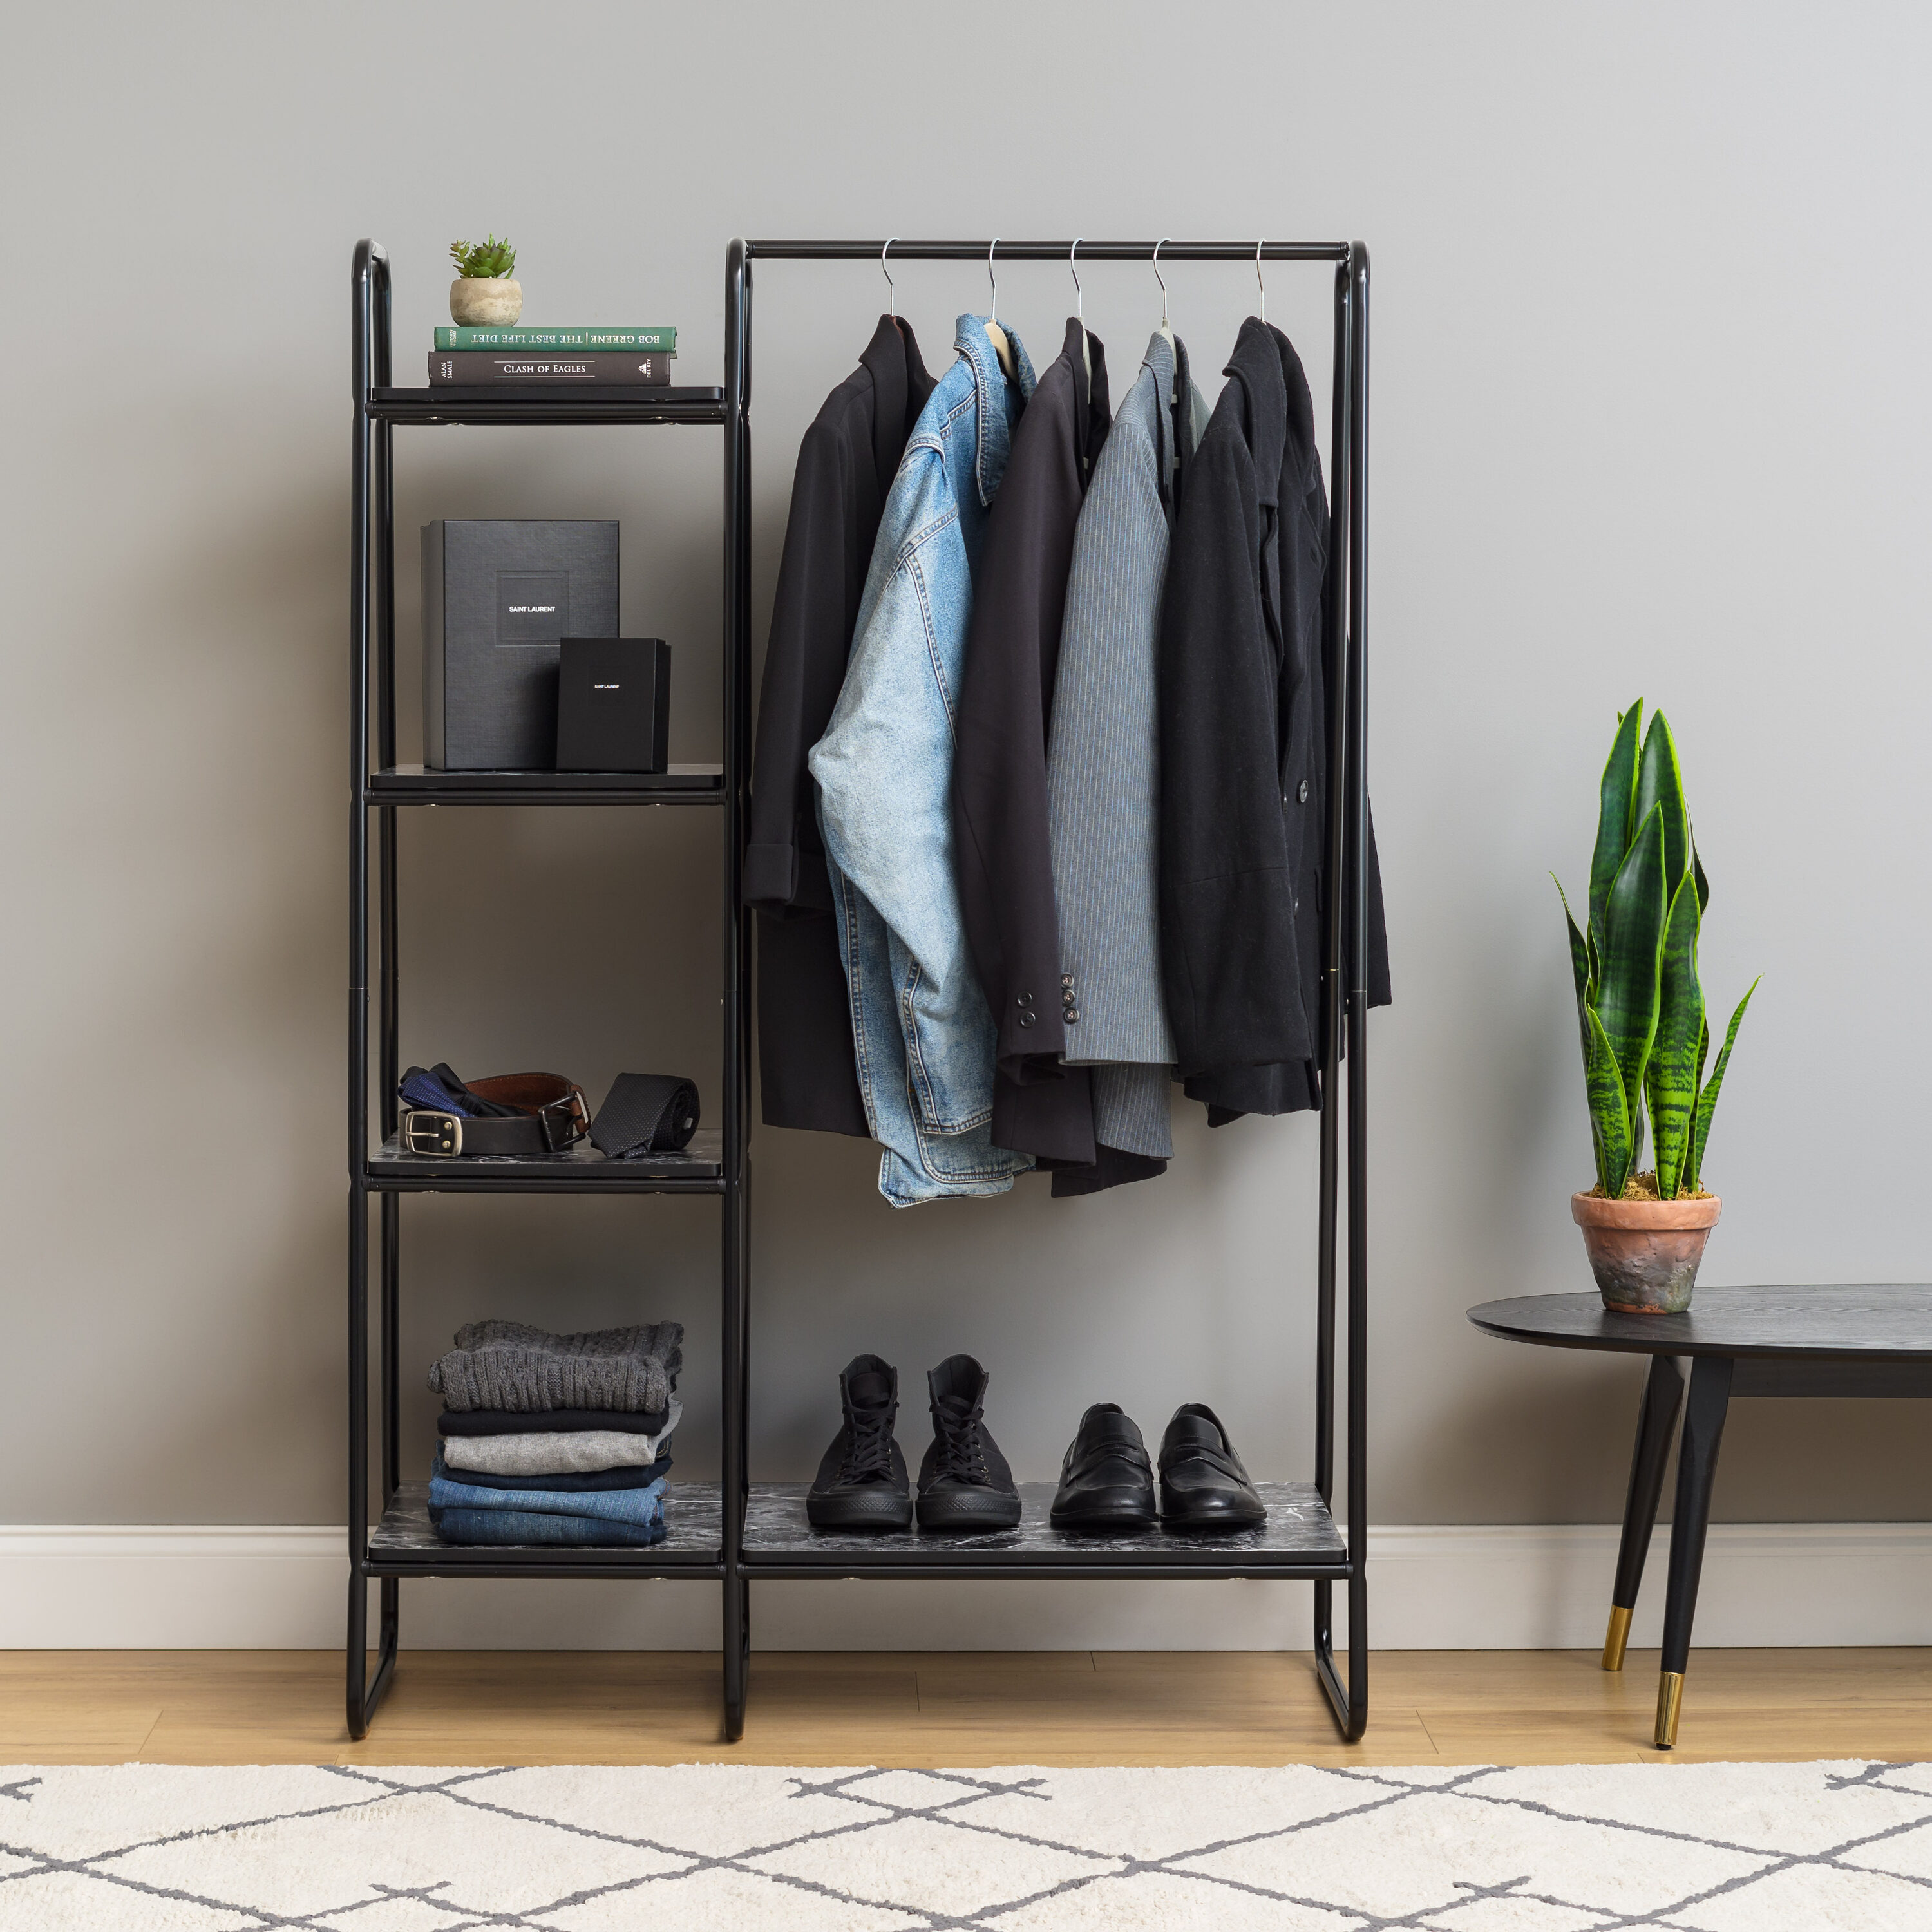 Honey-Can-Do Black/Natural Freestanding Metal Clothing Rack with Wood Shelves